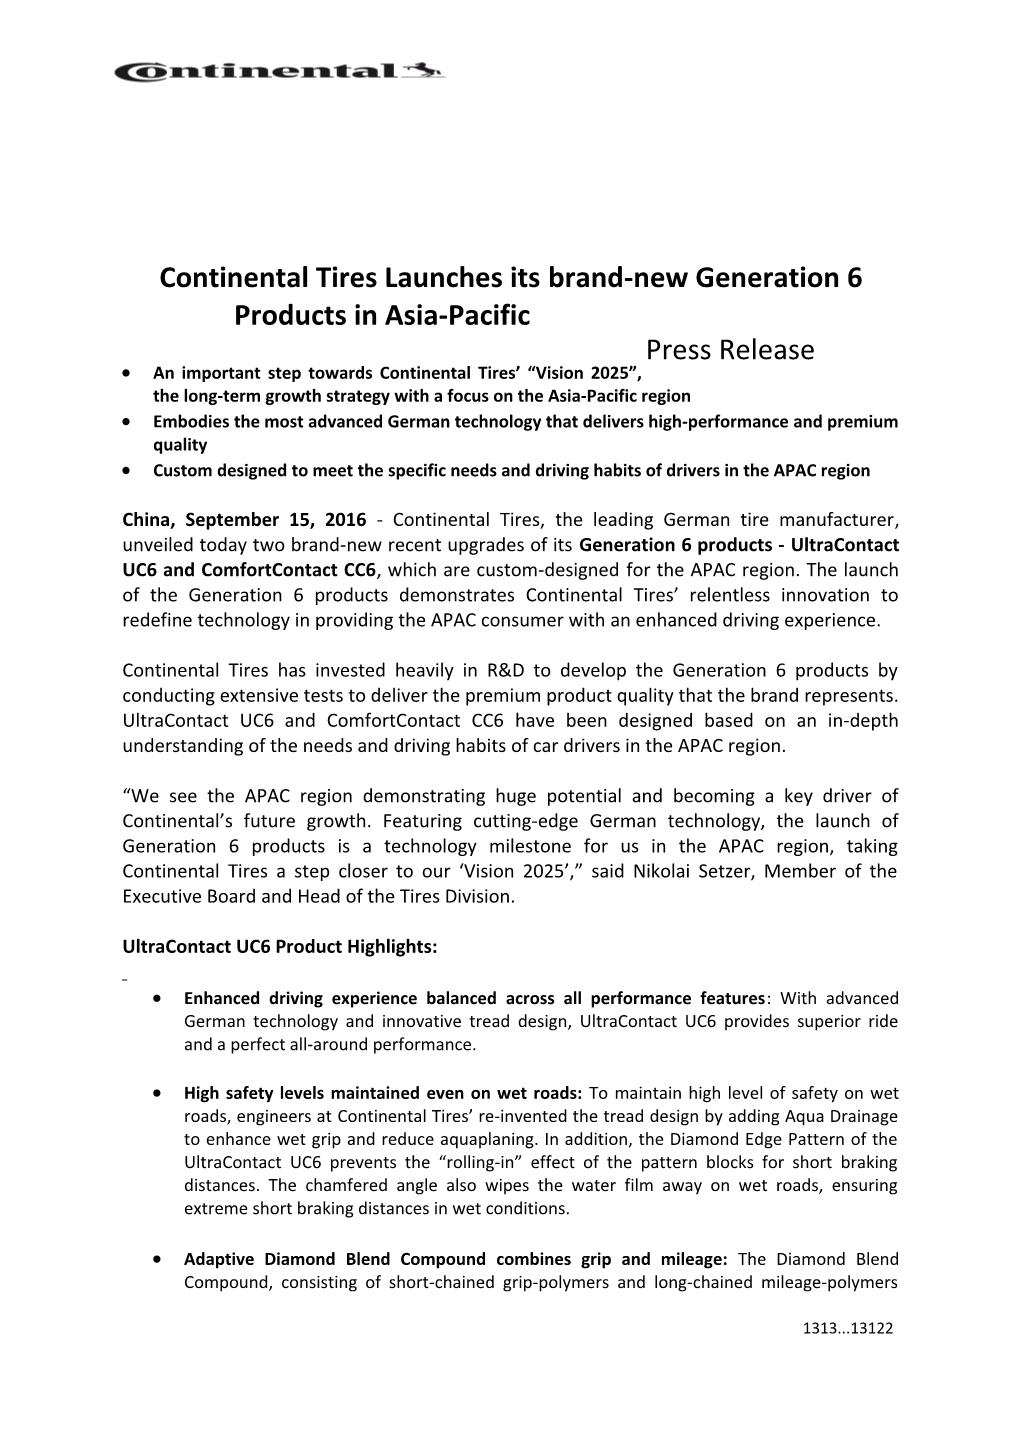 Continental Tires Launches Its Brand-New Generation 6 Products in Asia-Pacific